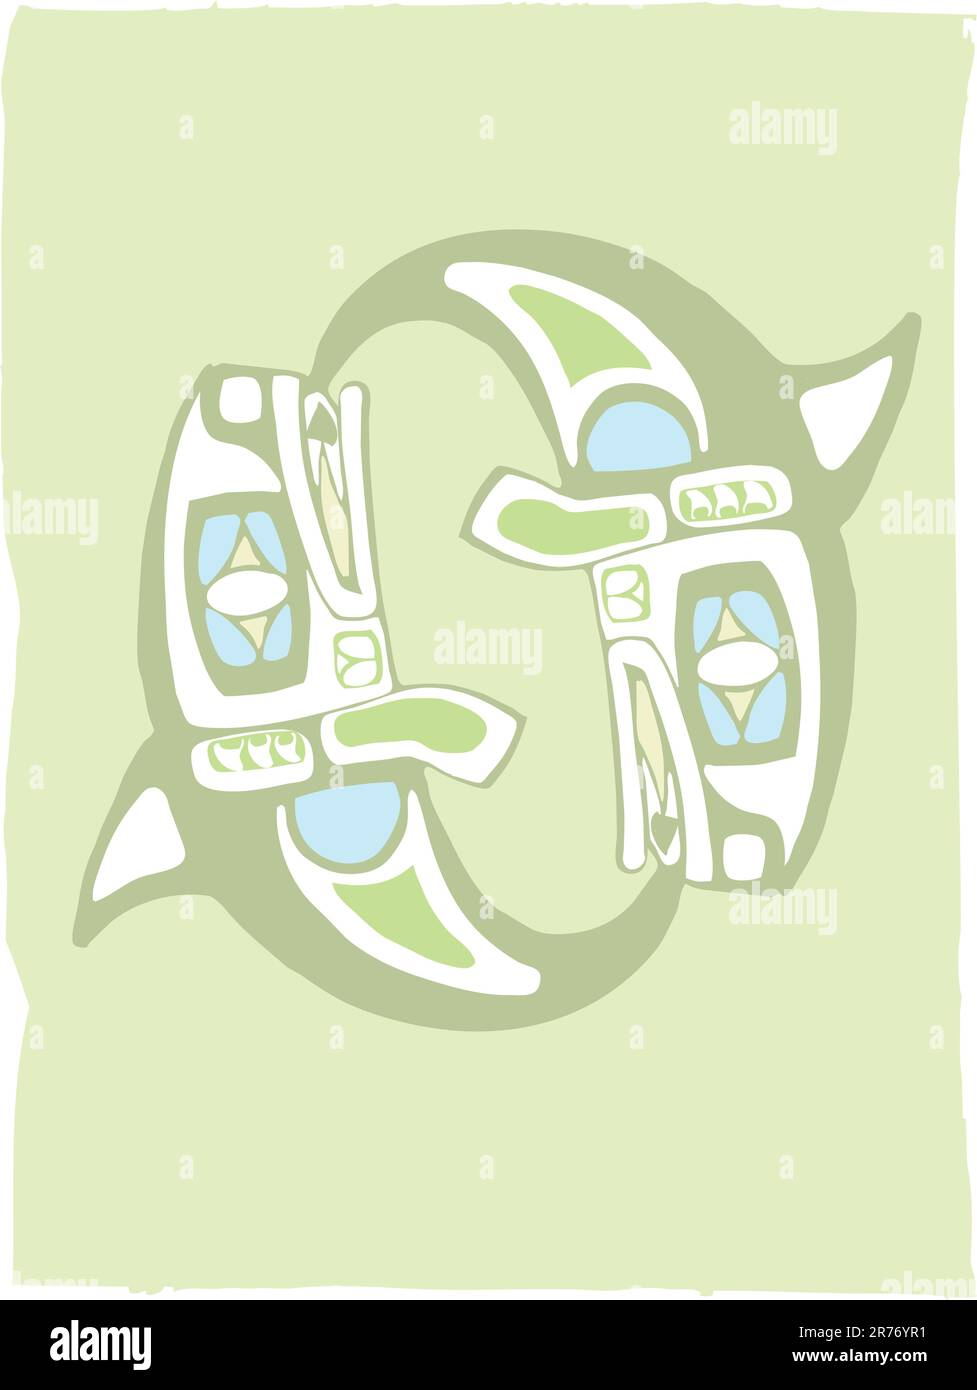 Spinning OrcaTwo Spinning Whales in the style of Northwest Coast Native imagery. Stock Vector